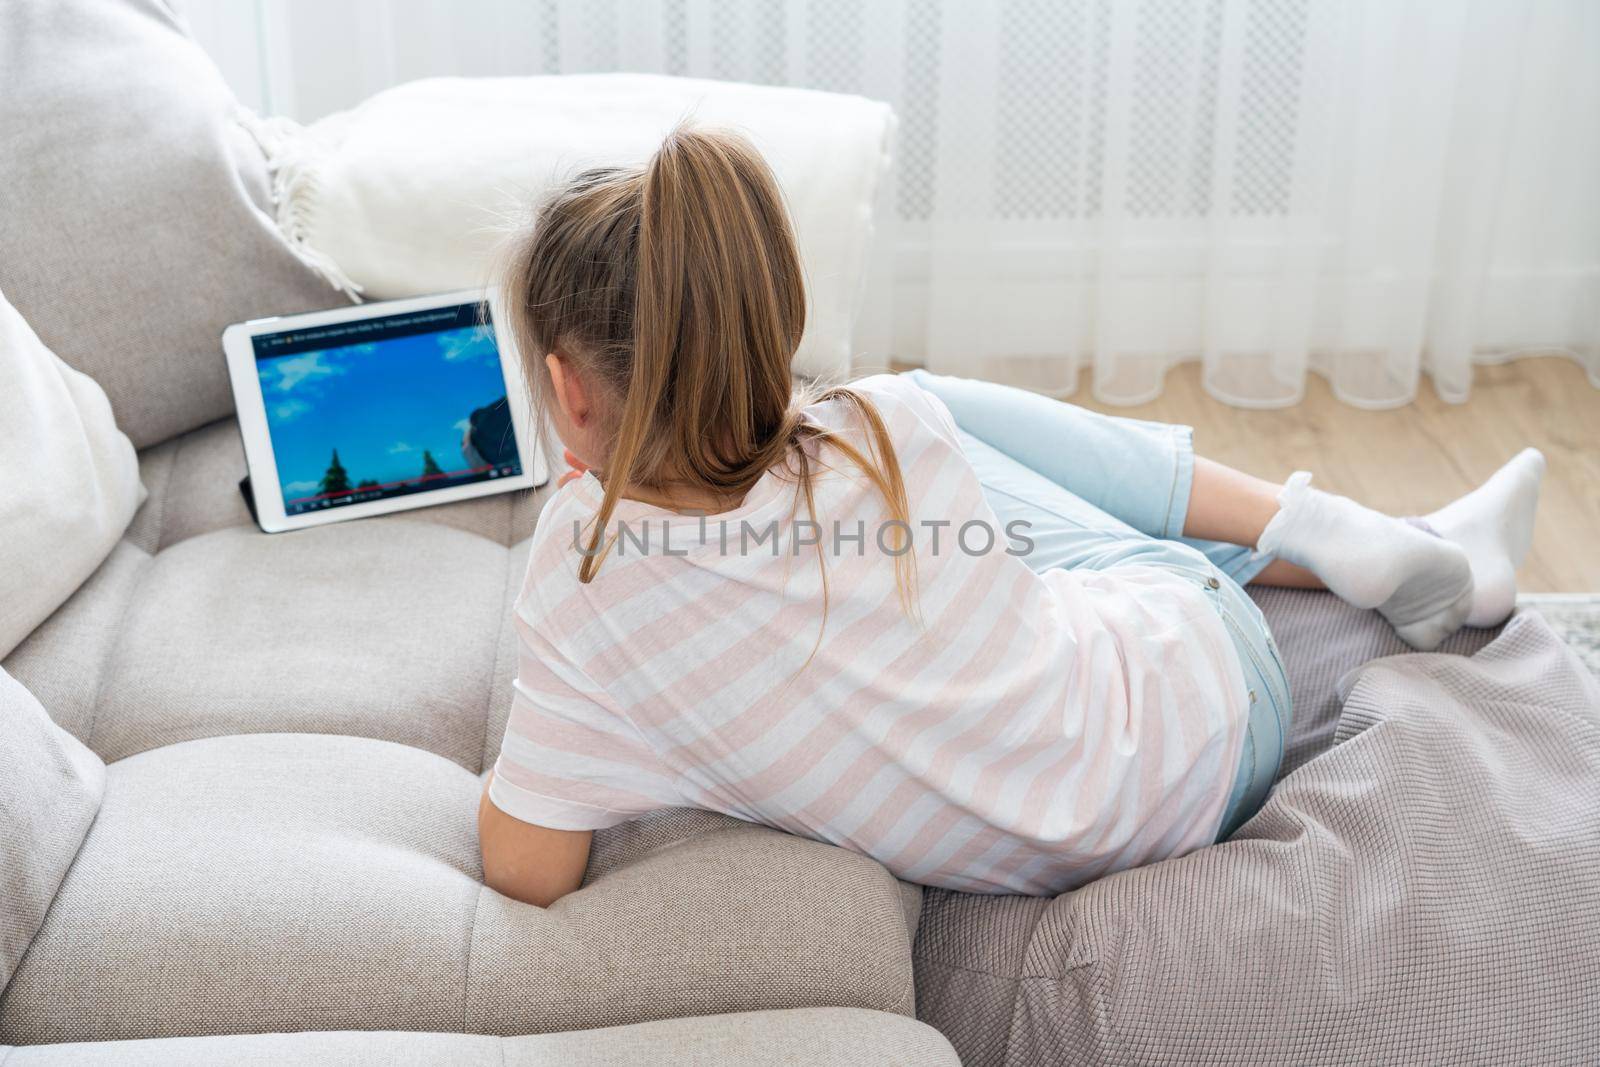 Girl Lying On Couch And Using Tablet by Mariakray